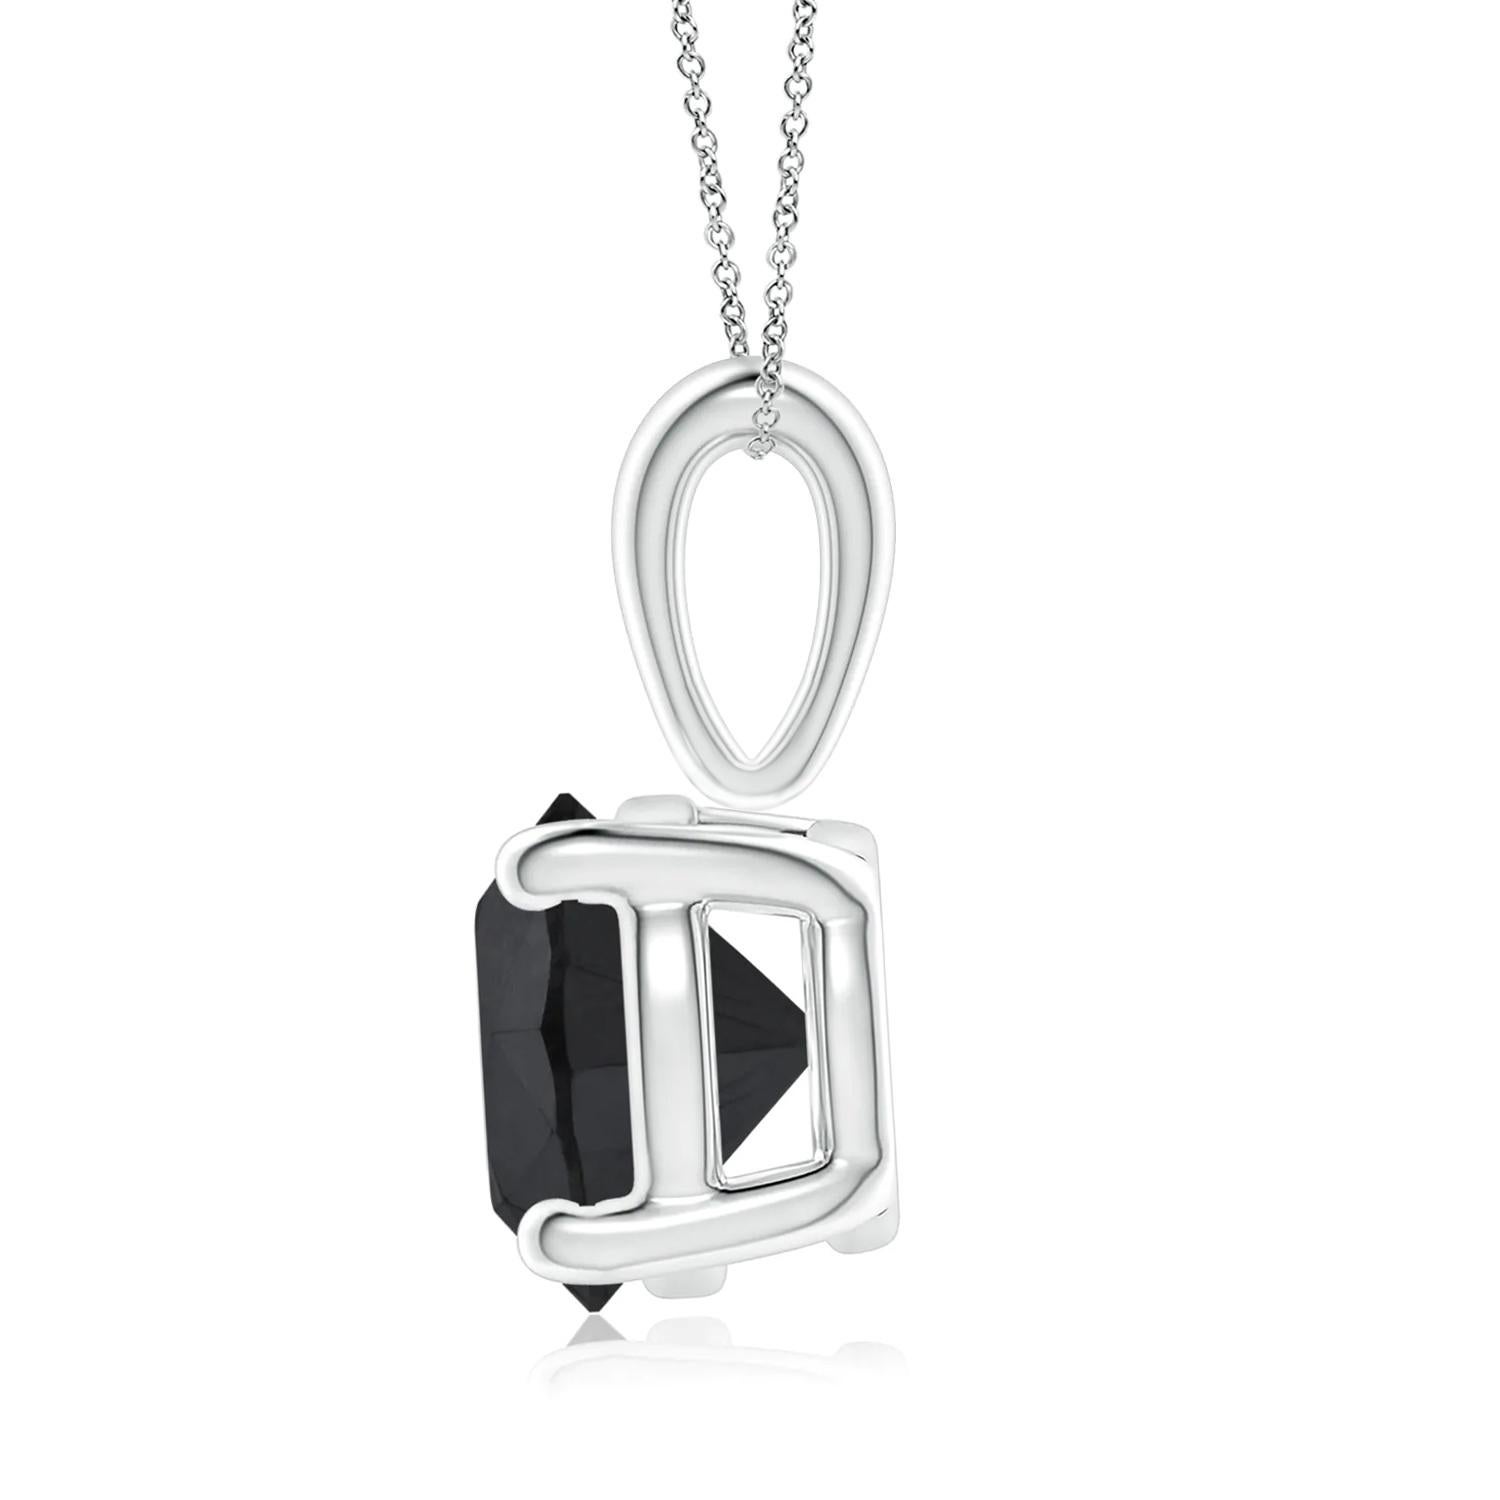 Surprise a special woman in your life with this breathtaking, statement hand crafted solitaire black diamond necklace. This eye-catching pendant necklace features a 1.6 carat round cut black diamond, measuring 6.80 x 6.79 x 5.23 mm set in 14k white